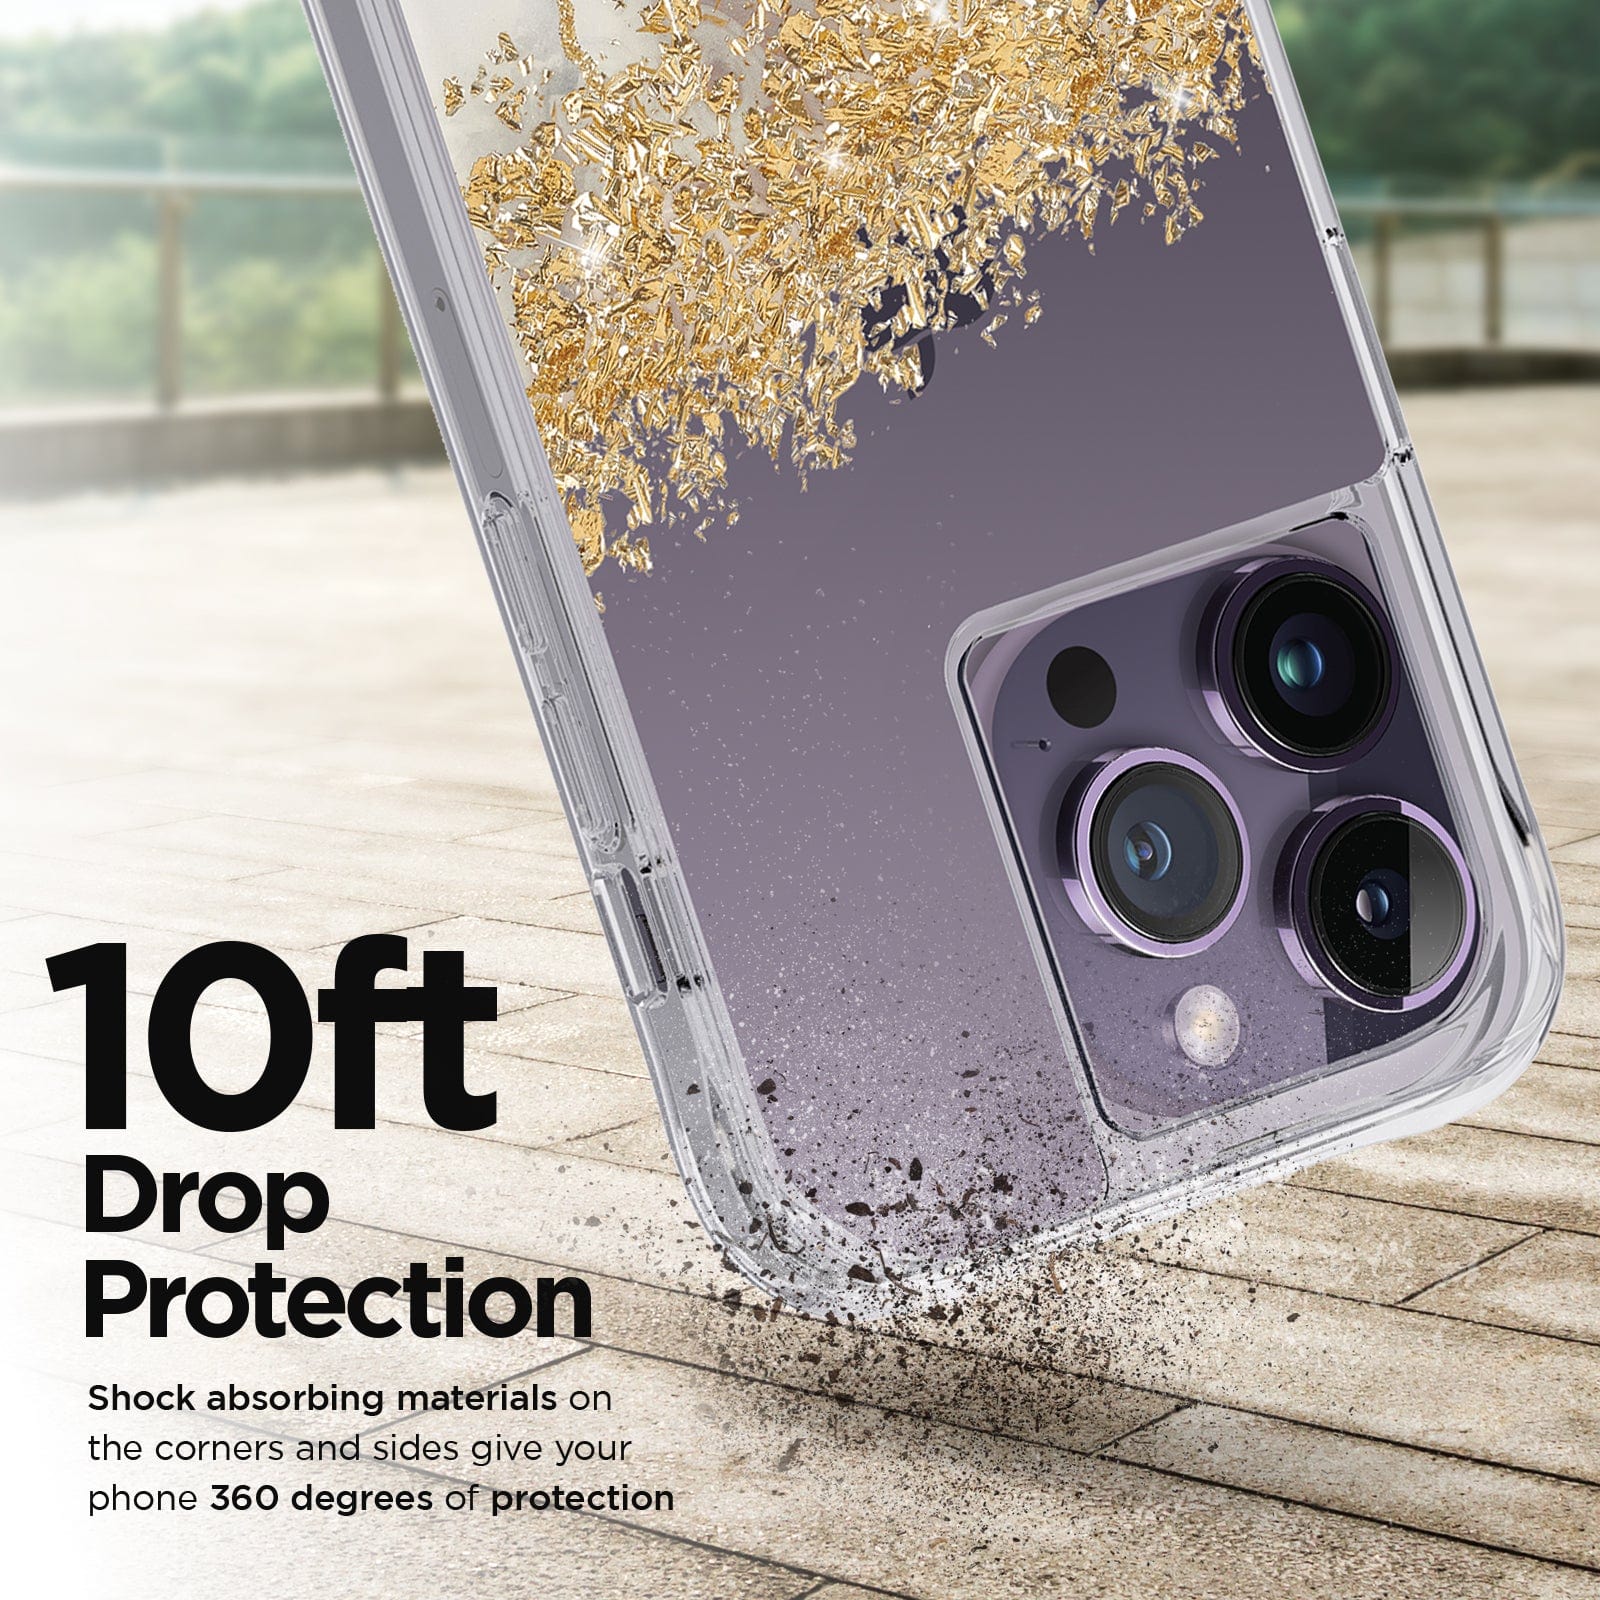 10FT DROP PROTECTION. SHOCK ABSORBING MATERIALS ONT HE CORNERS AND SIDES GIVE YOUR PHONE 260 DEGREES OF PROTECTION. 